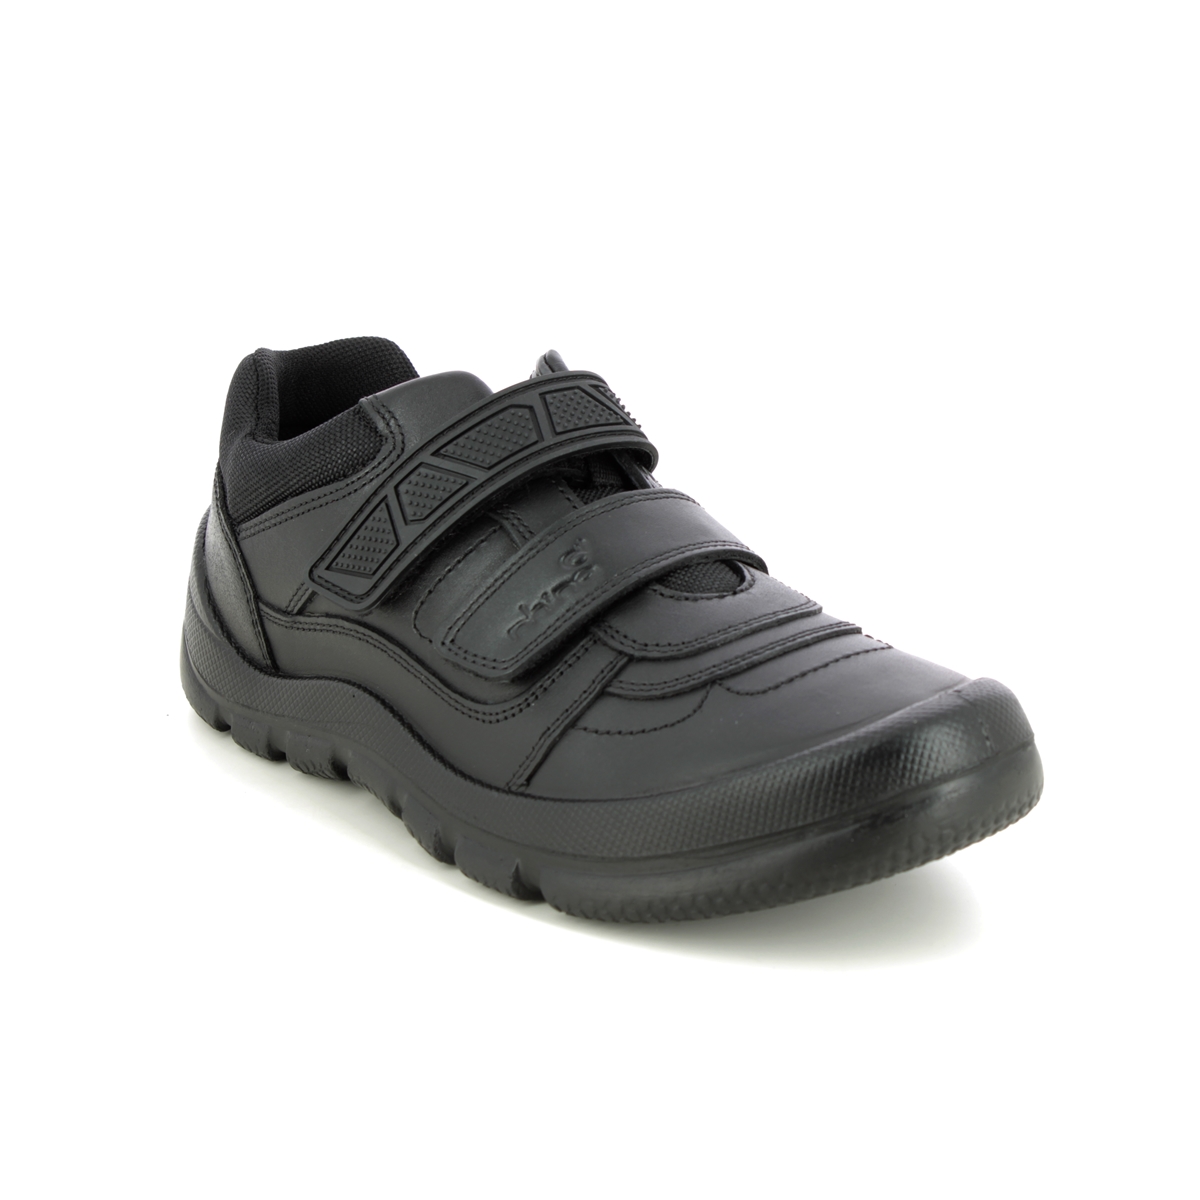 Start Rite Rhino Warrior Black leather Kids Boys Shoes 8237-76F in a Plain Leather in Size 5.5